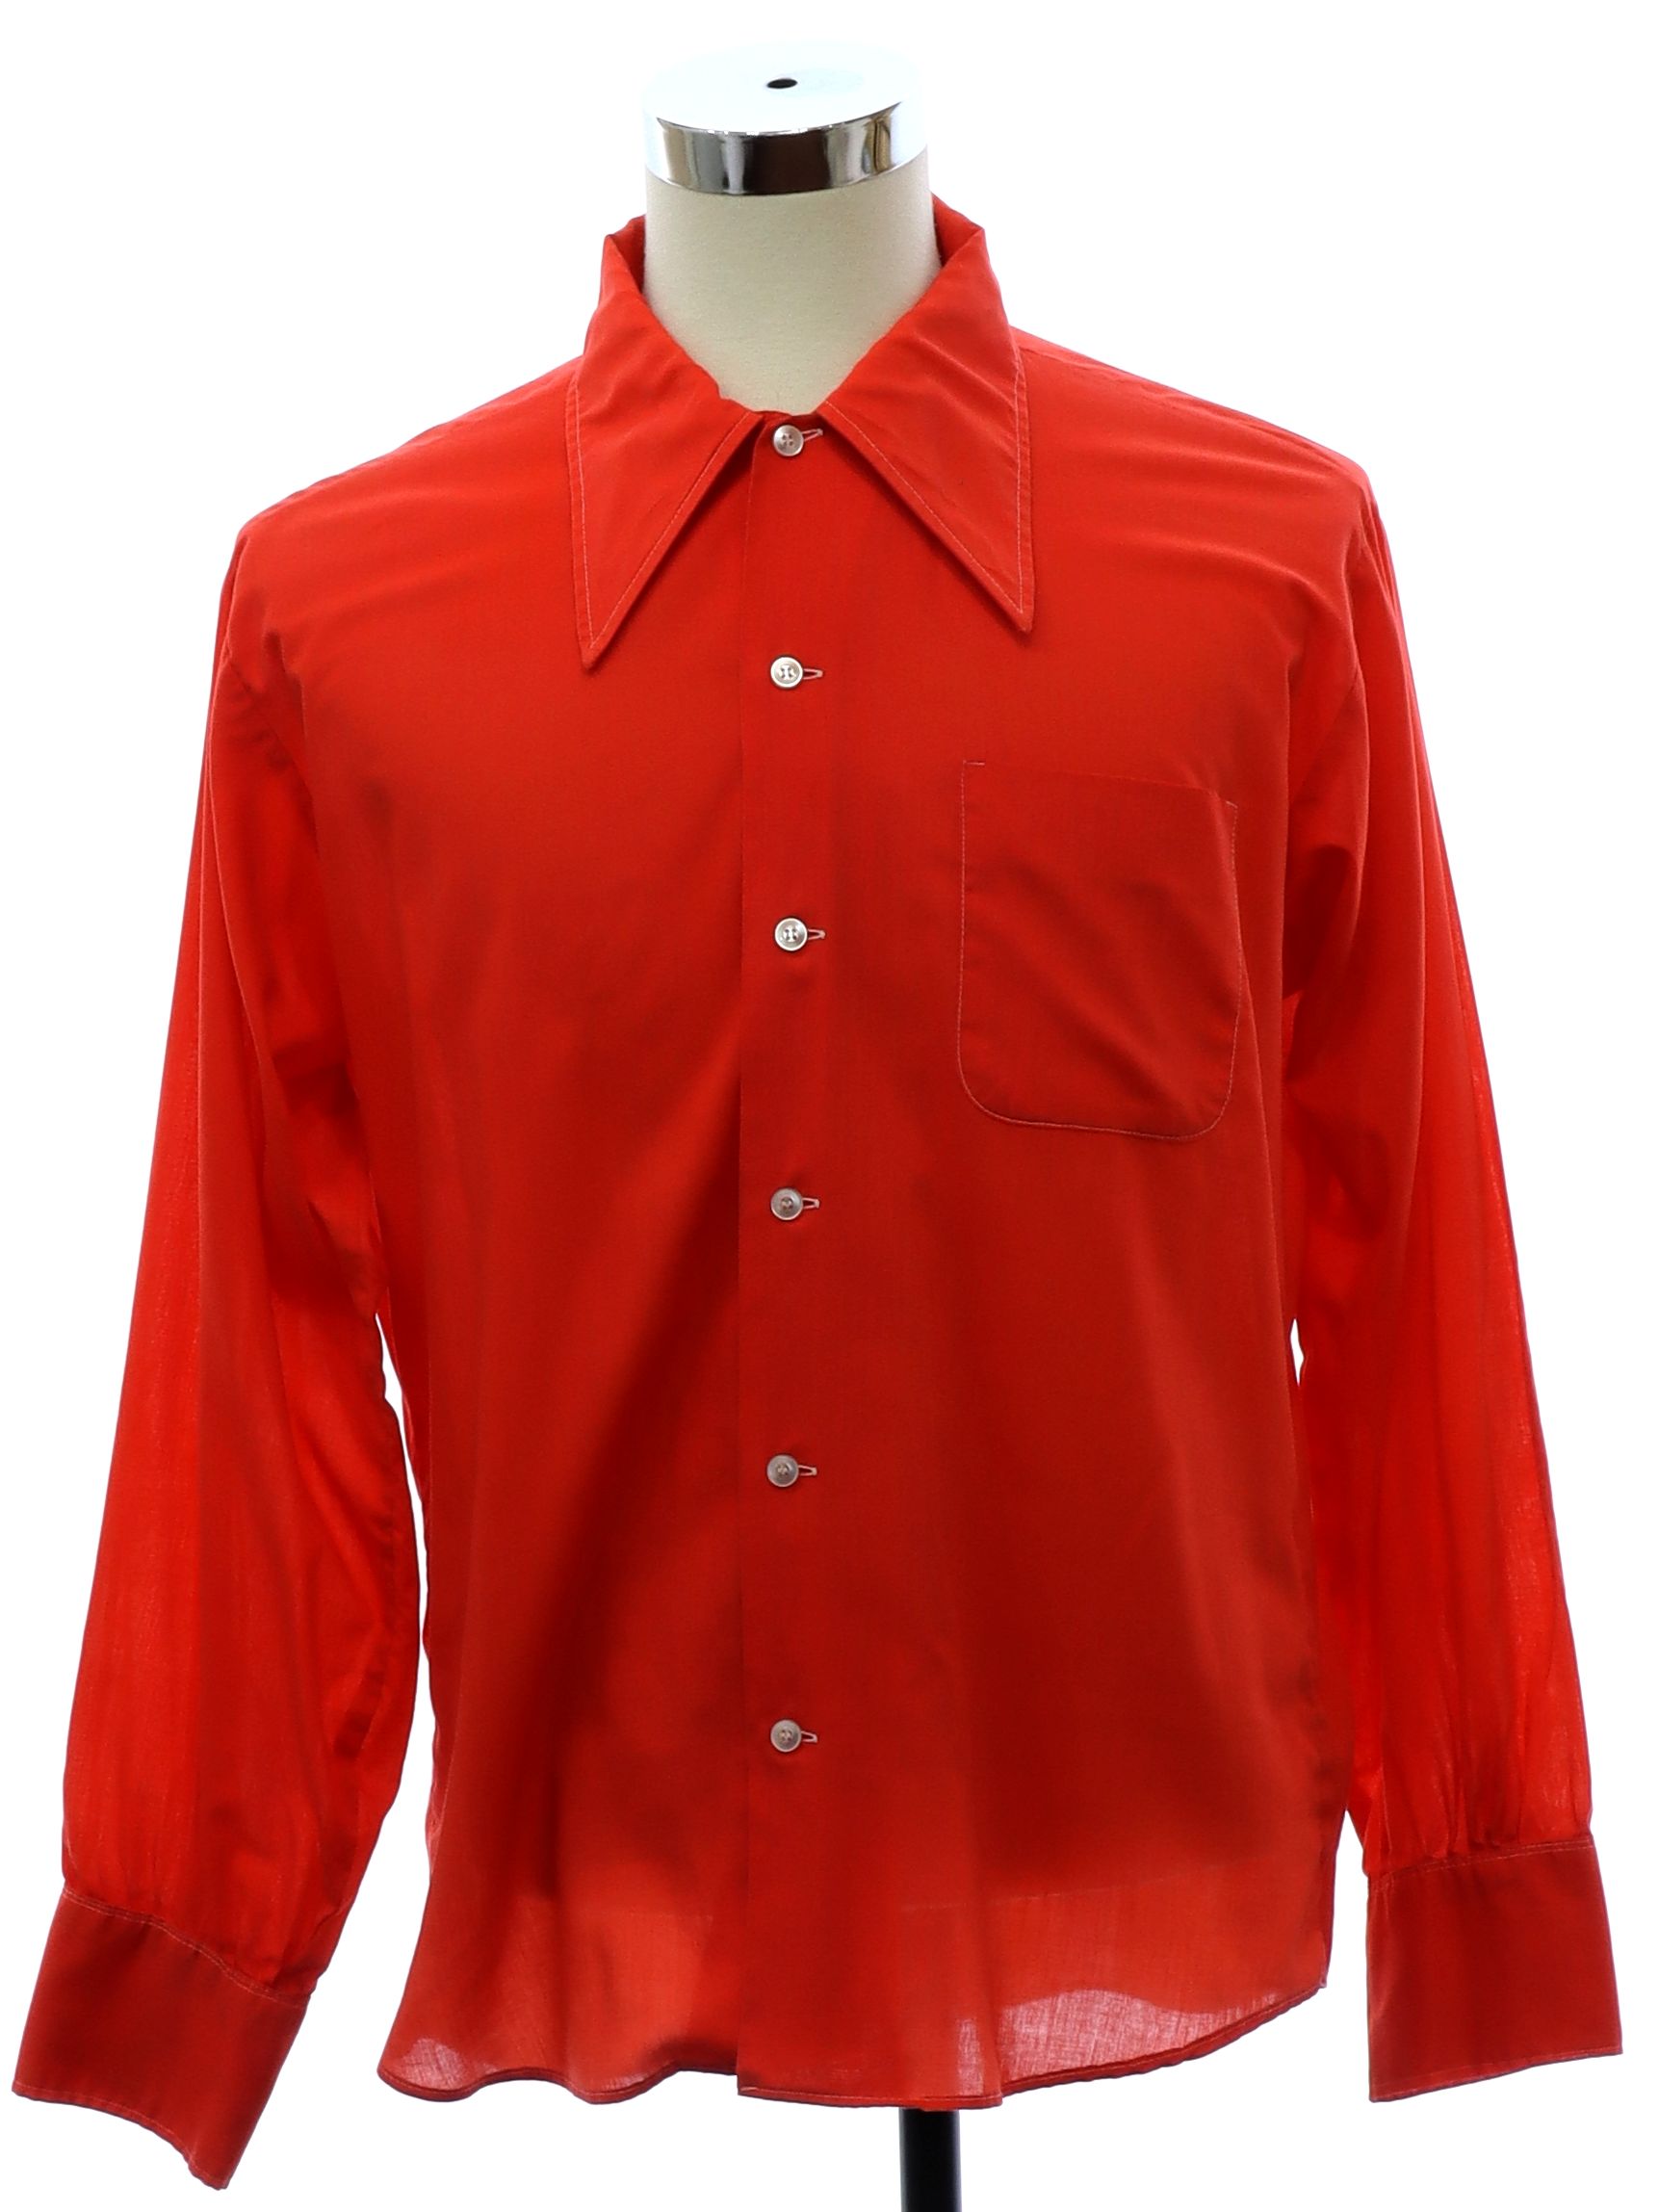 Antigua Chicago Cubs Red Compression Long Sleeve Dress Shirt, Red, 70% Cotton / 27% Polyester / 3% SPANDEX, Size L, Rally House